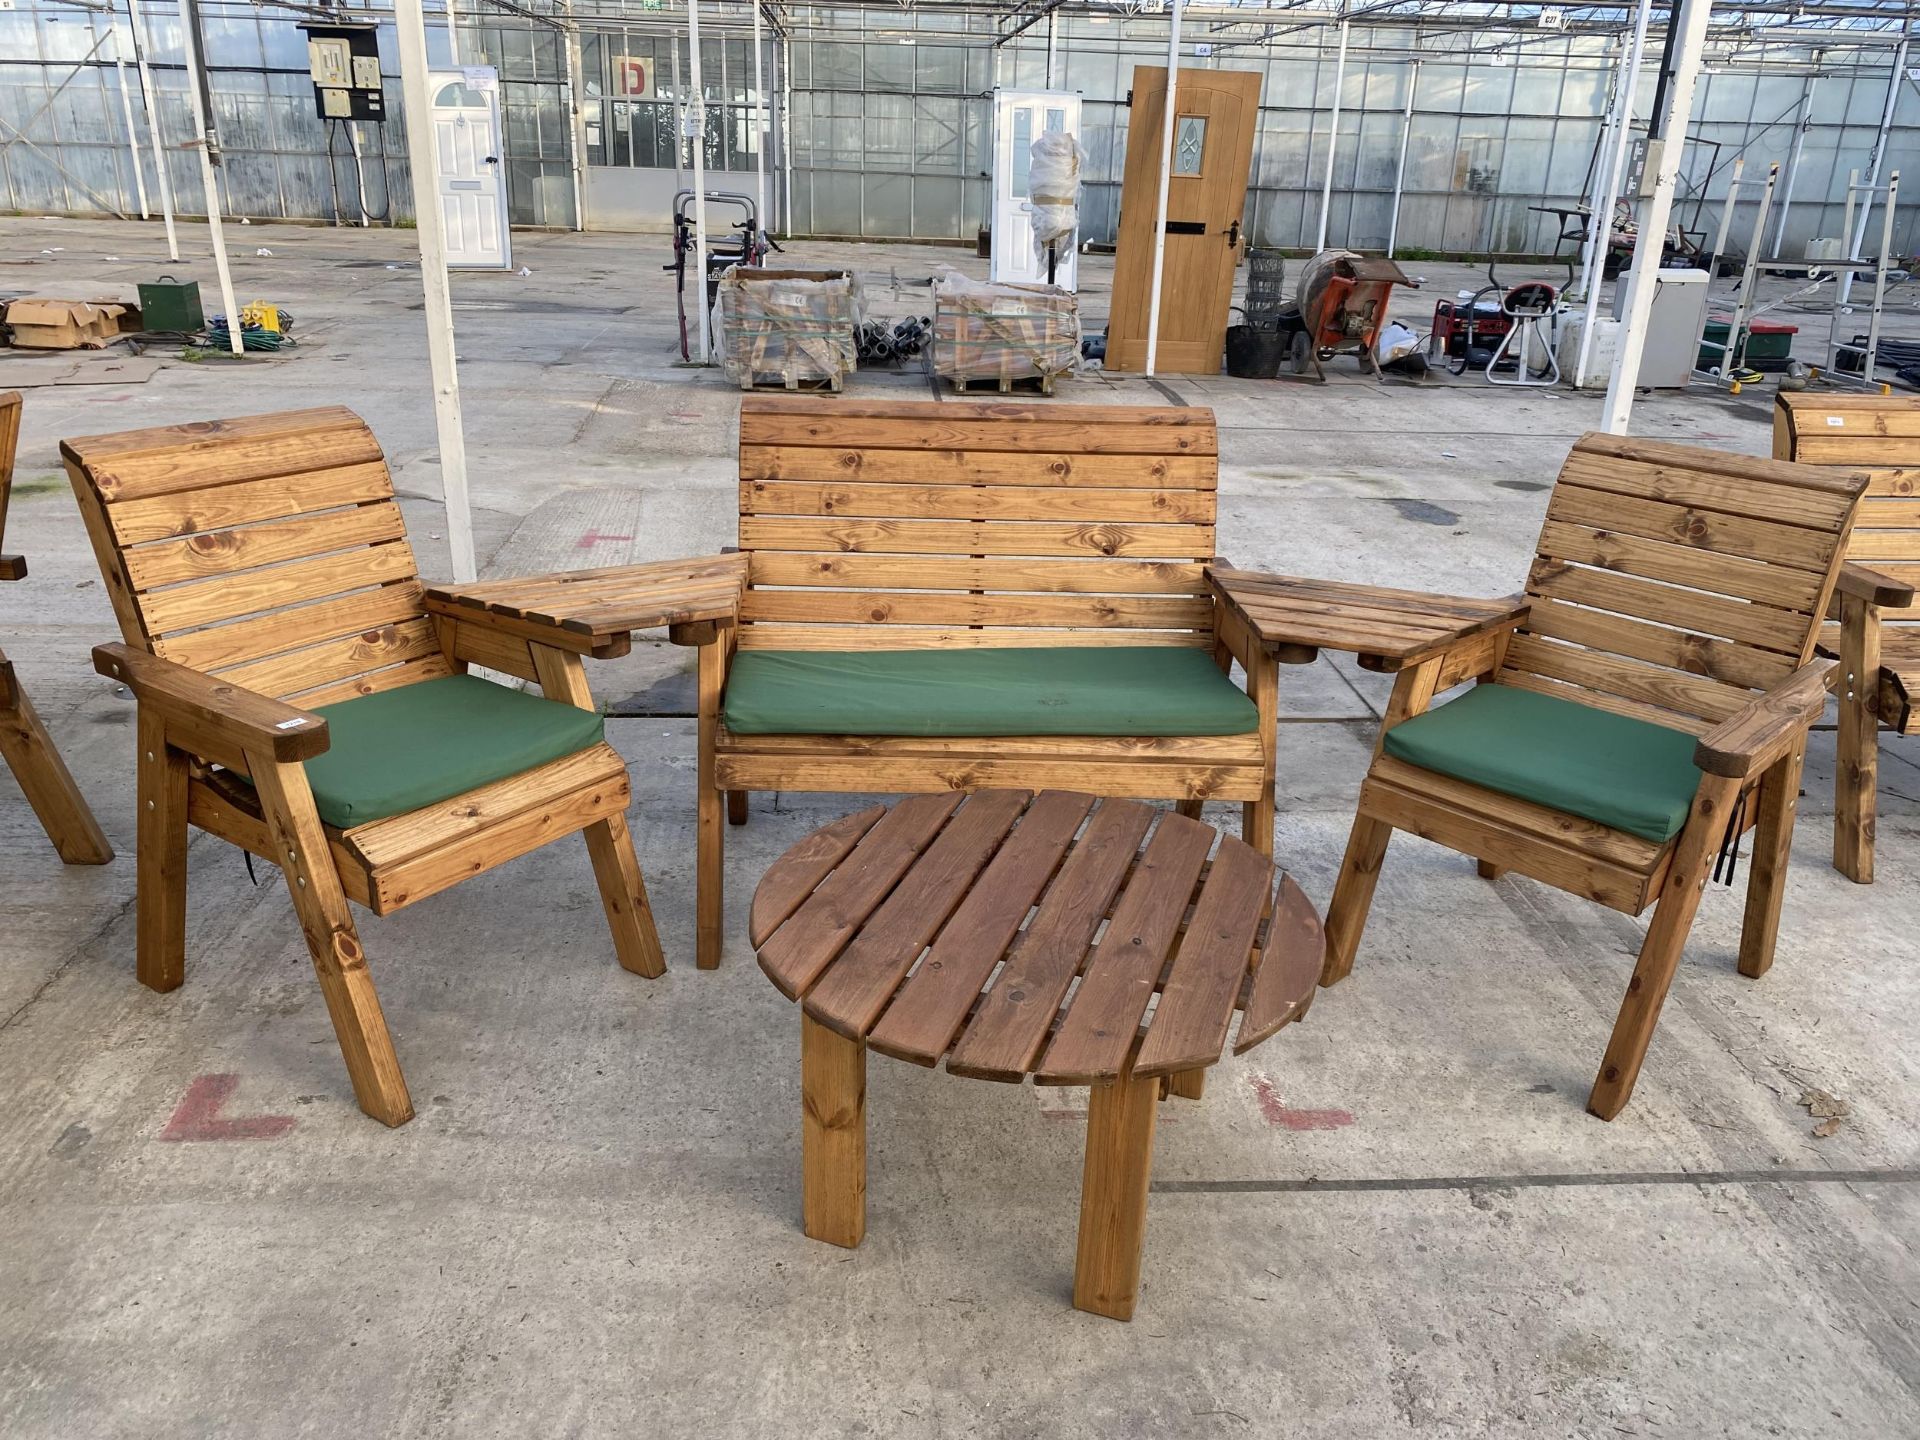 AN AS NEW EX DISPLAY CHARLES TAYLOR PATIO SET COMPRISING OF A BENCH, TWO CHAIRS, A ROUND COFFEE